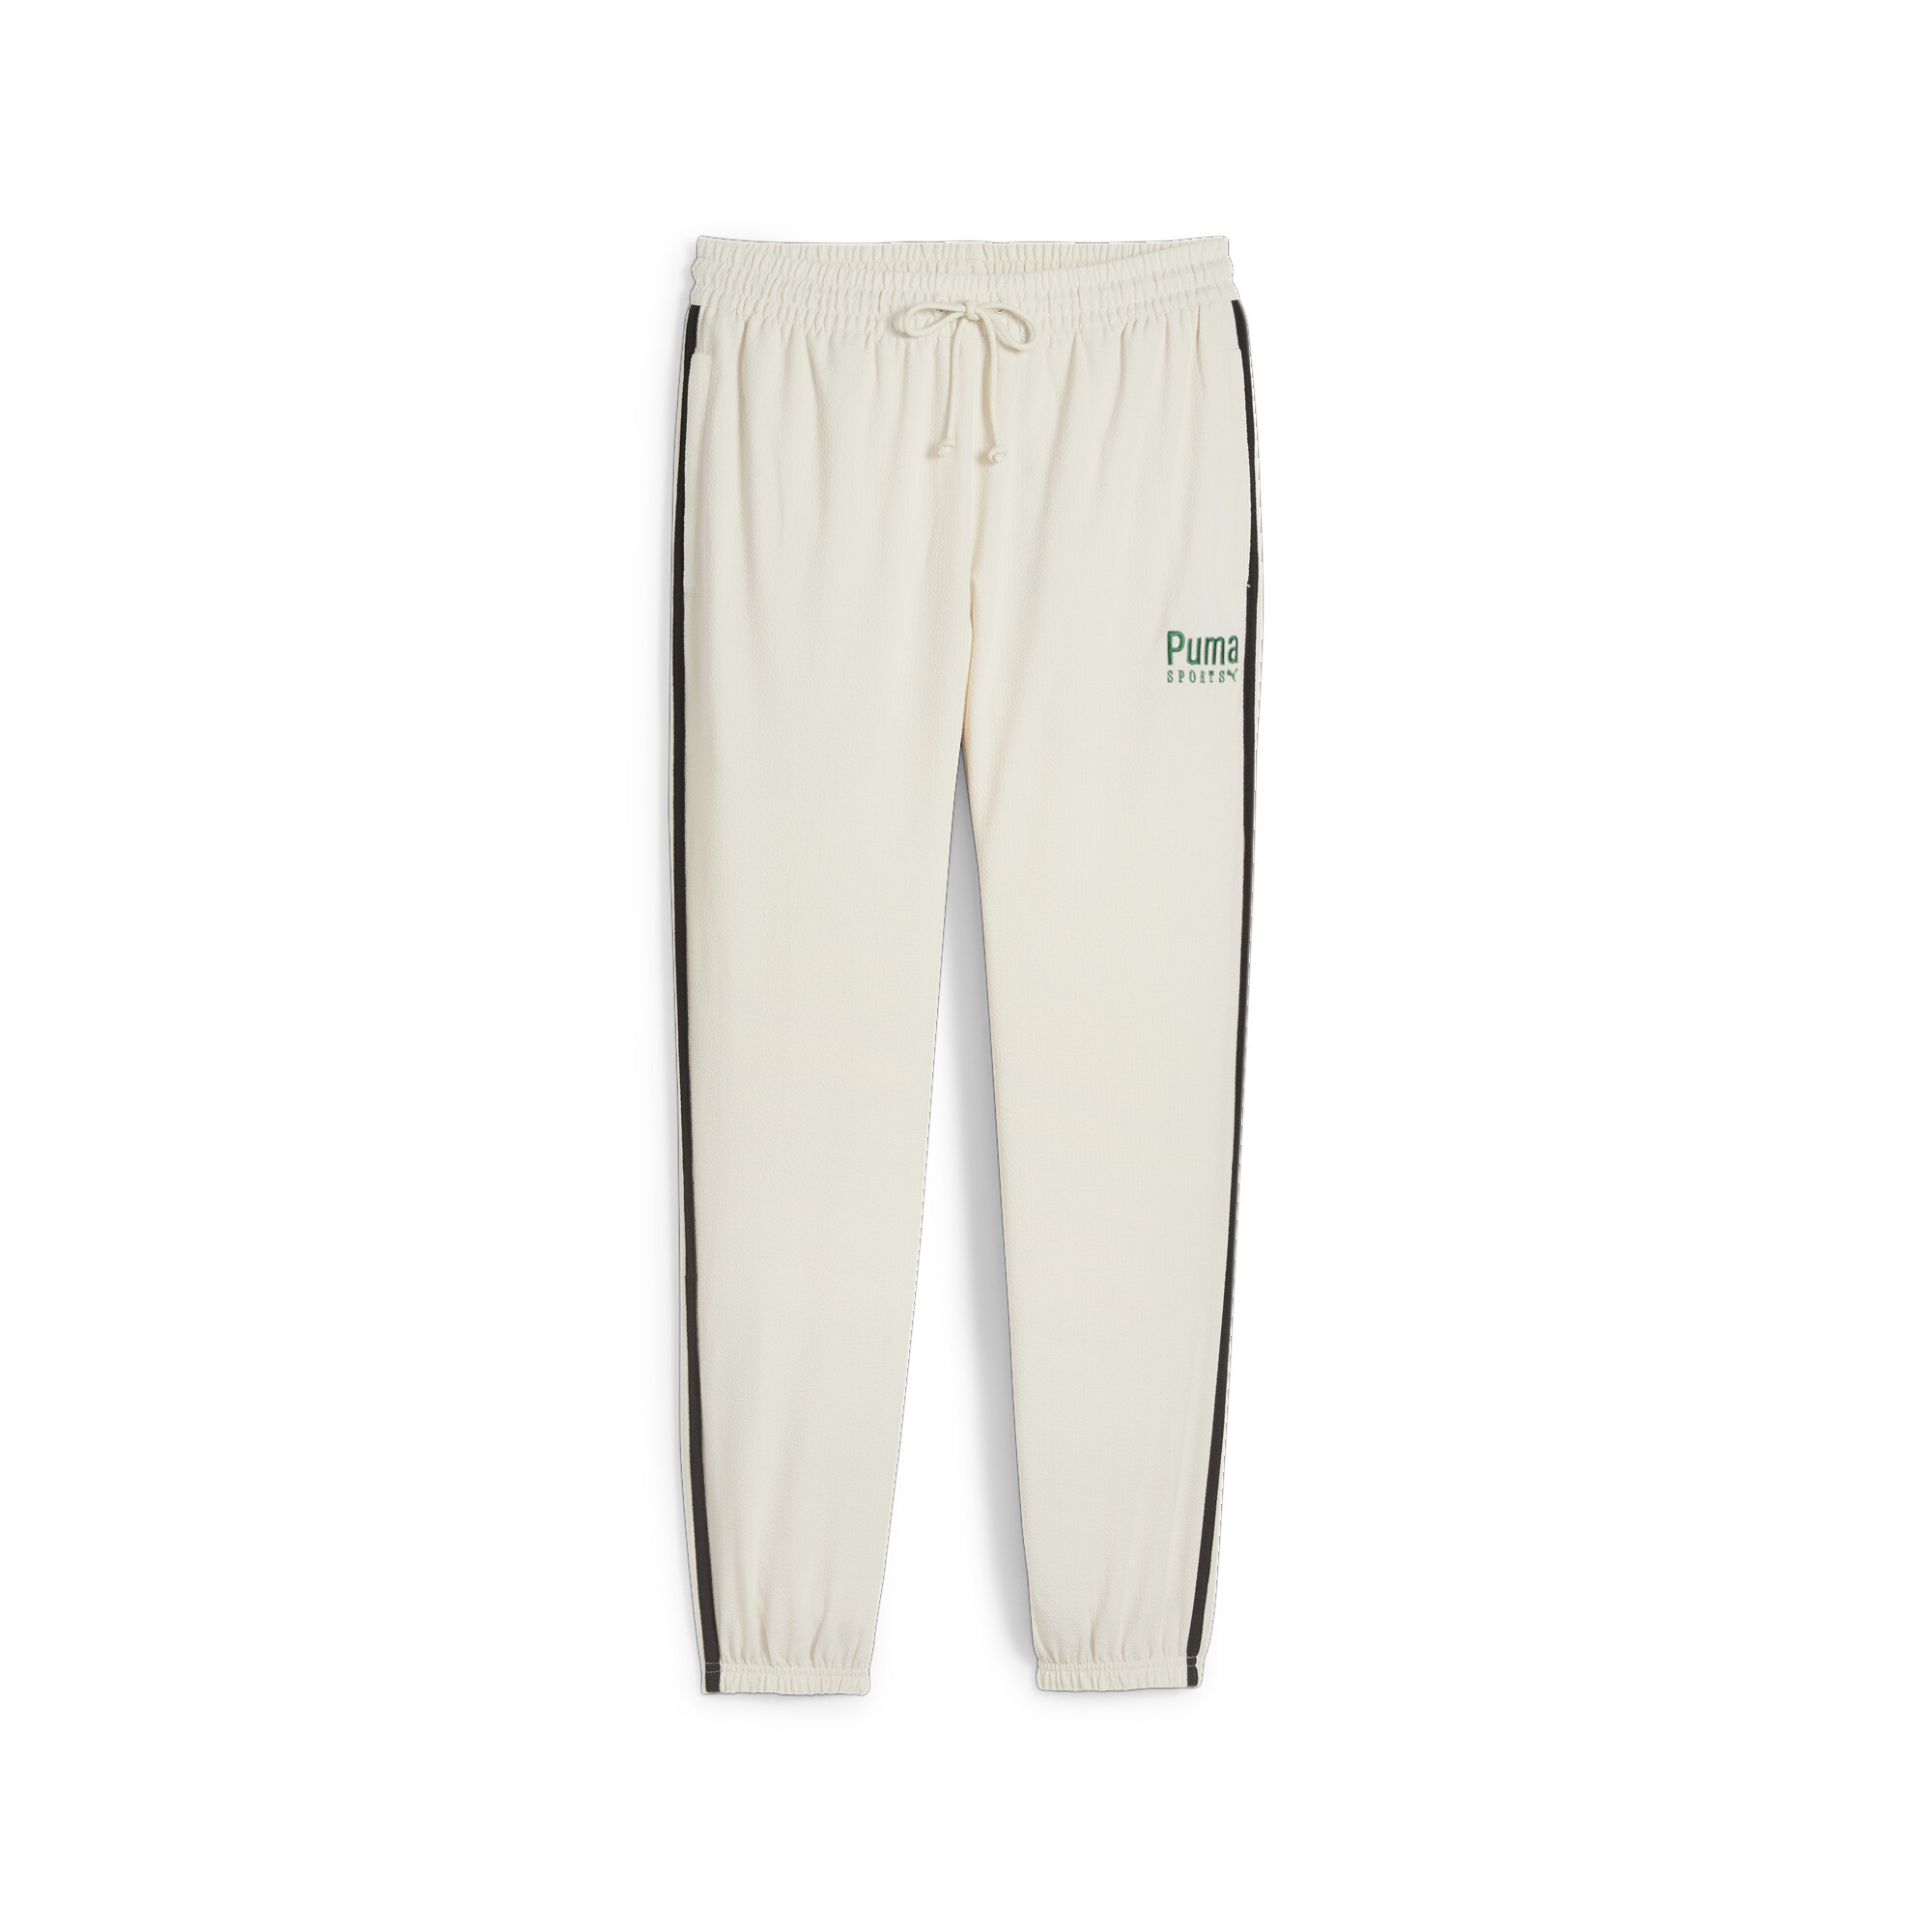 Men's PUMA TEAM Track Pants In White, Size Large